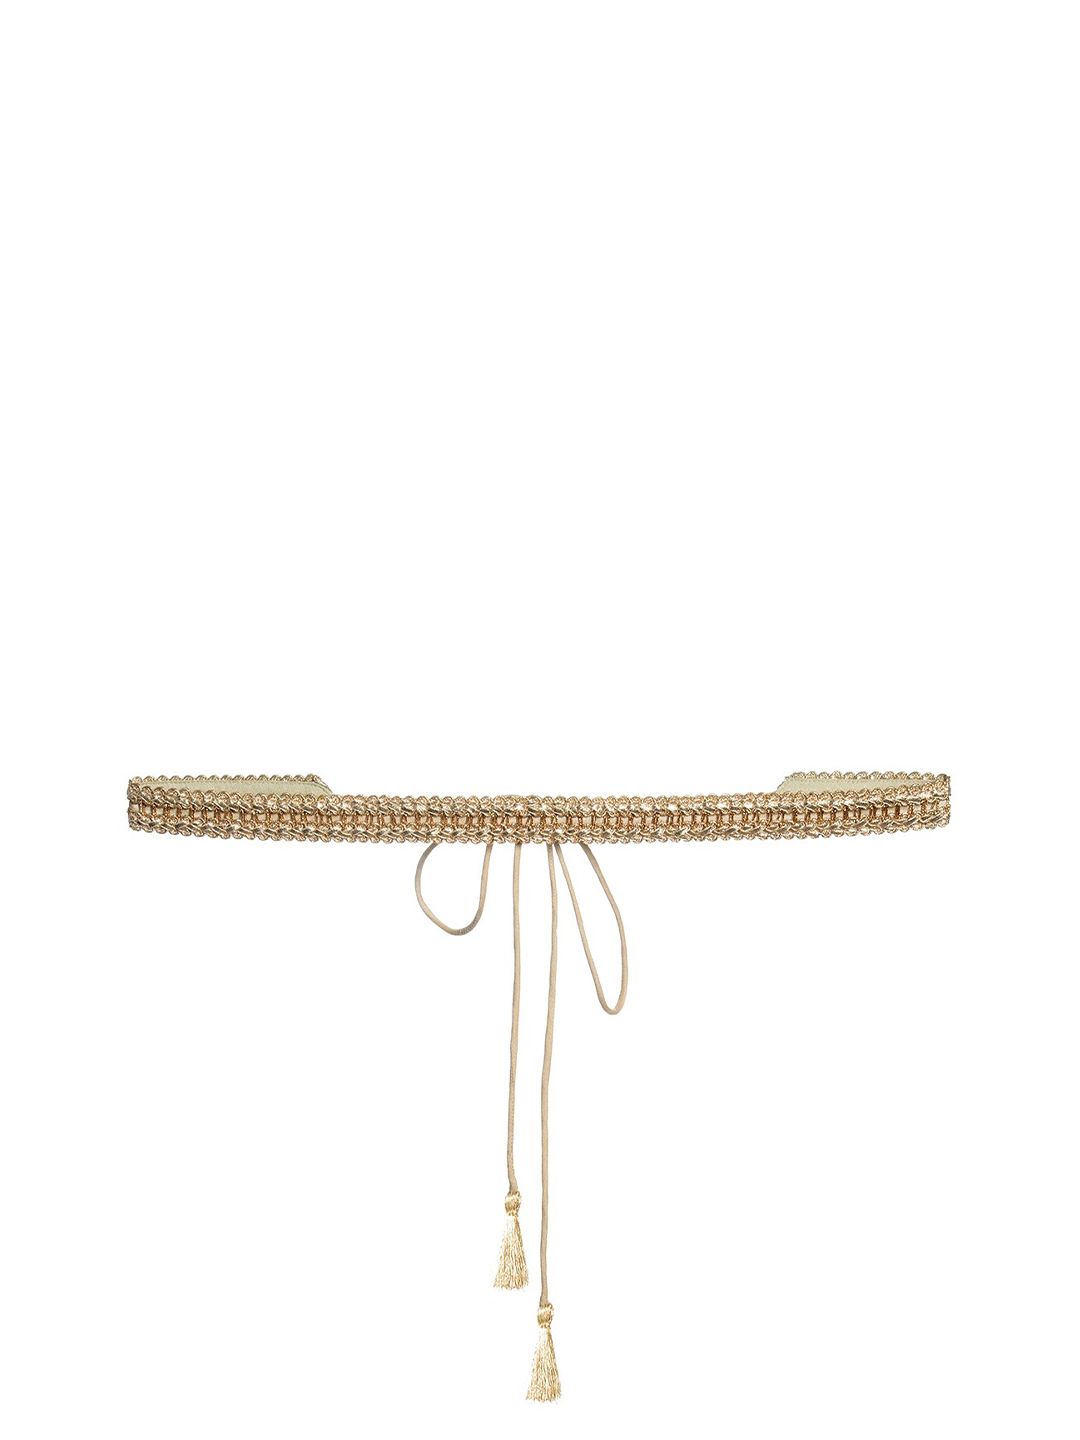 INDYA X PAYAL SINGHAL Women Gold-Toned Braided Gota Lace Belt Price in India